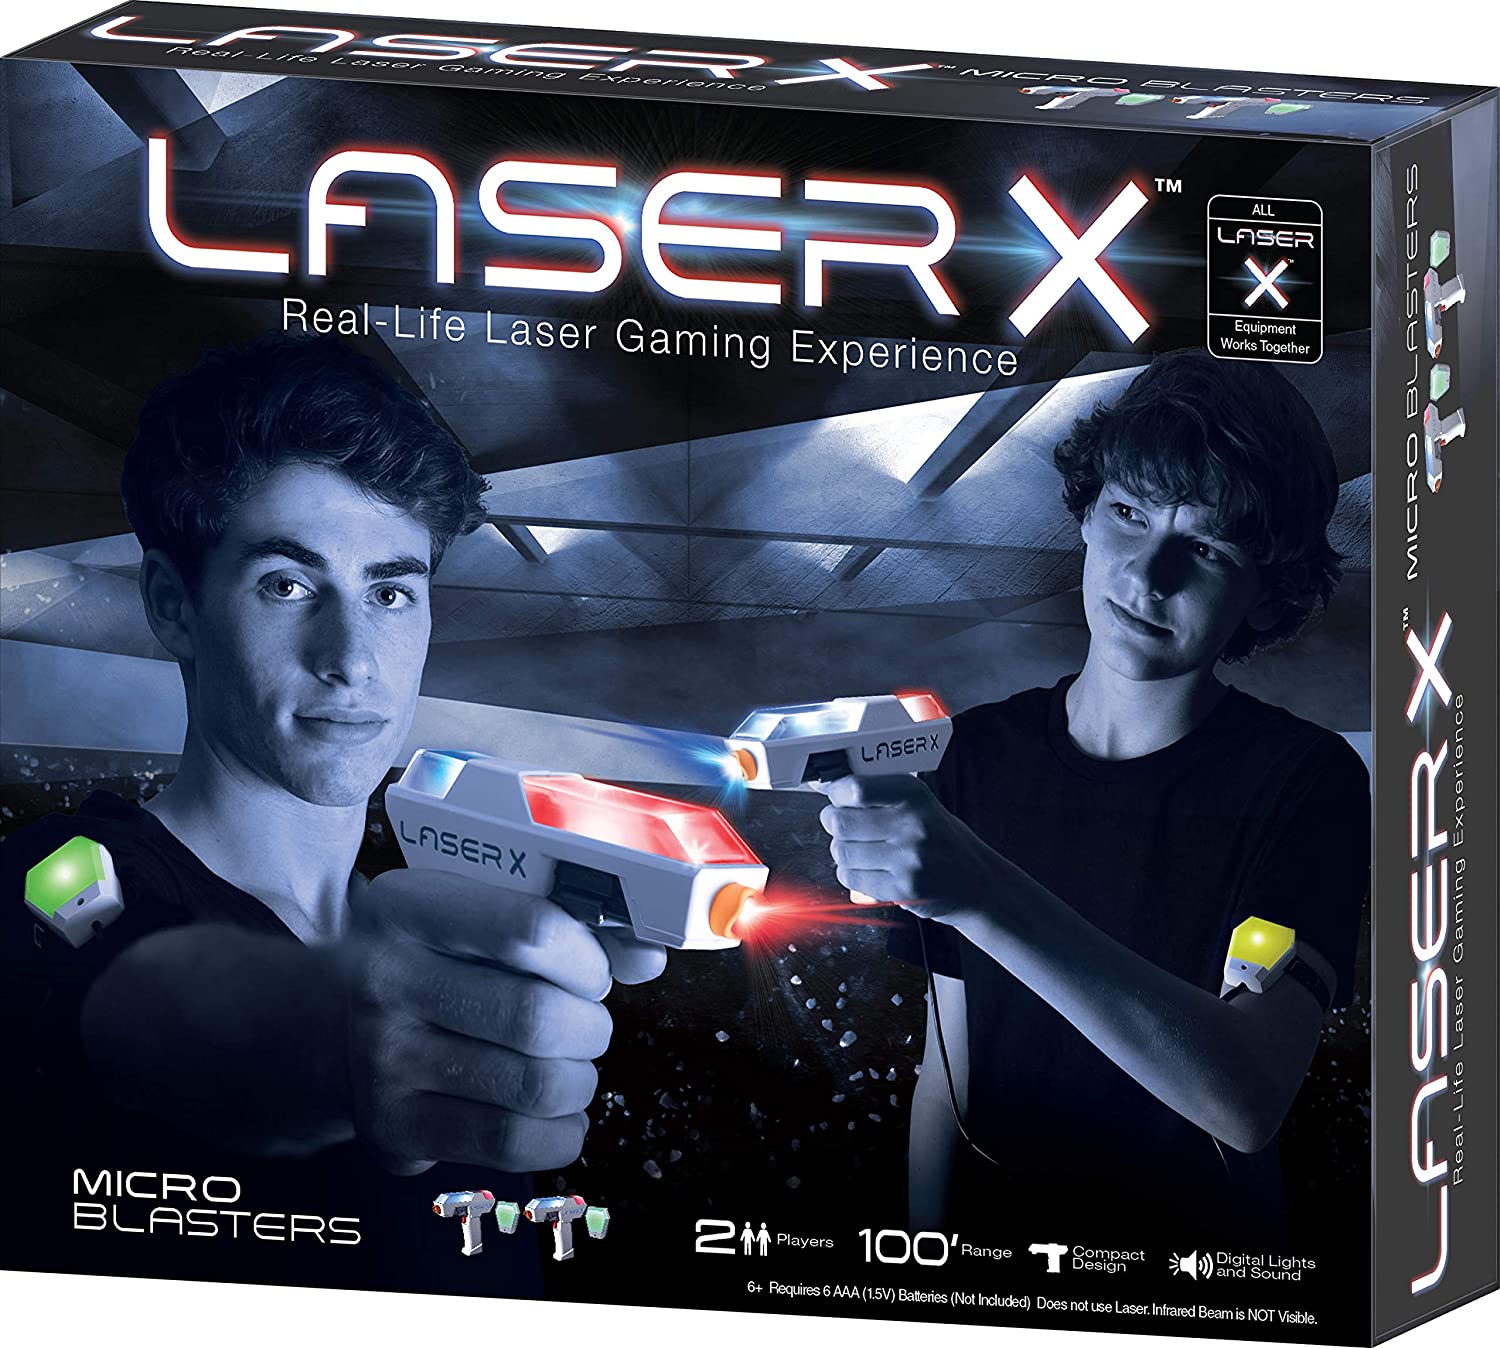 Buy LASER X 2 Player Laser Gaming Set with 2 Lasers and 2 arm Receivers in USA